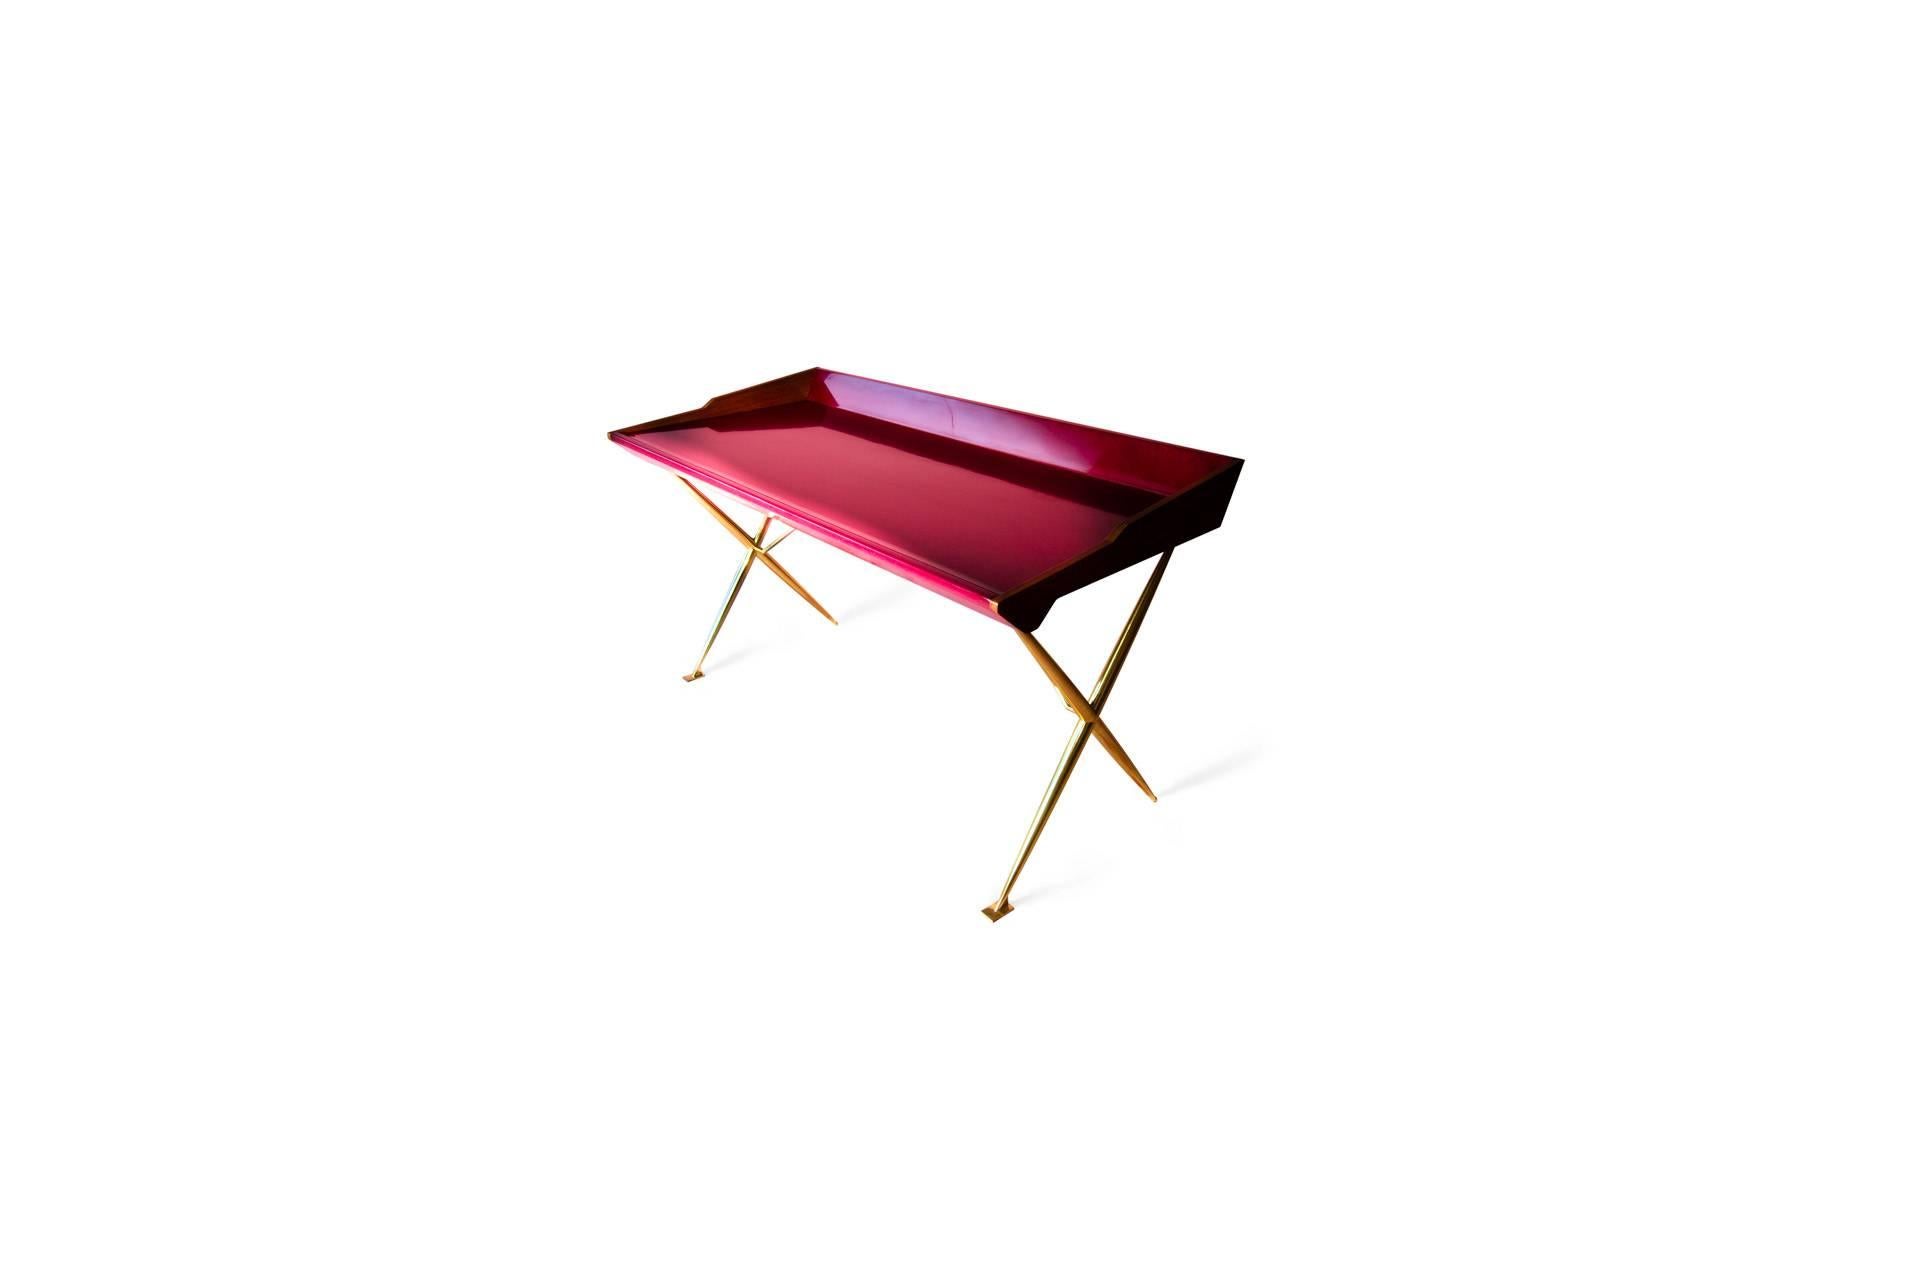 This one of a kind contemporary writing desk named Versatil by its creators is designed in Luxembourg and handmade in the European Union. The desk combines the Mid-Century Modern aesthetic style theory with a contemporary streamlined appeal.  The